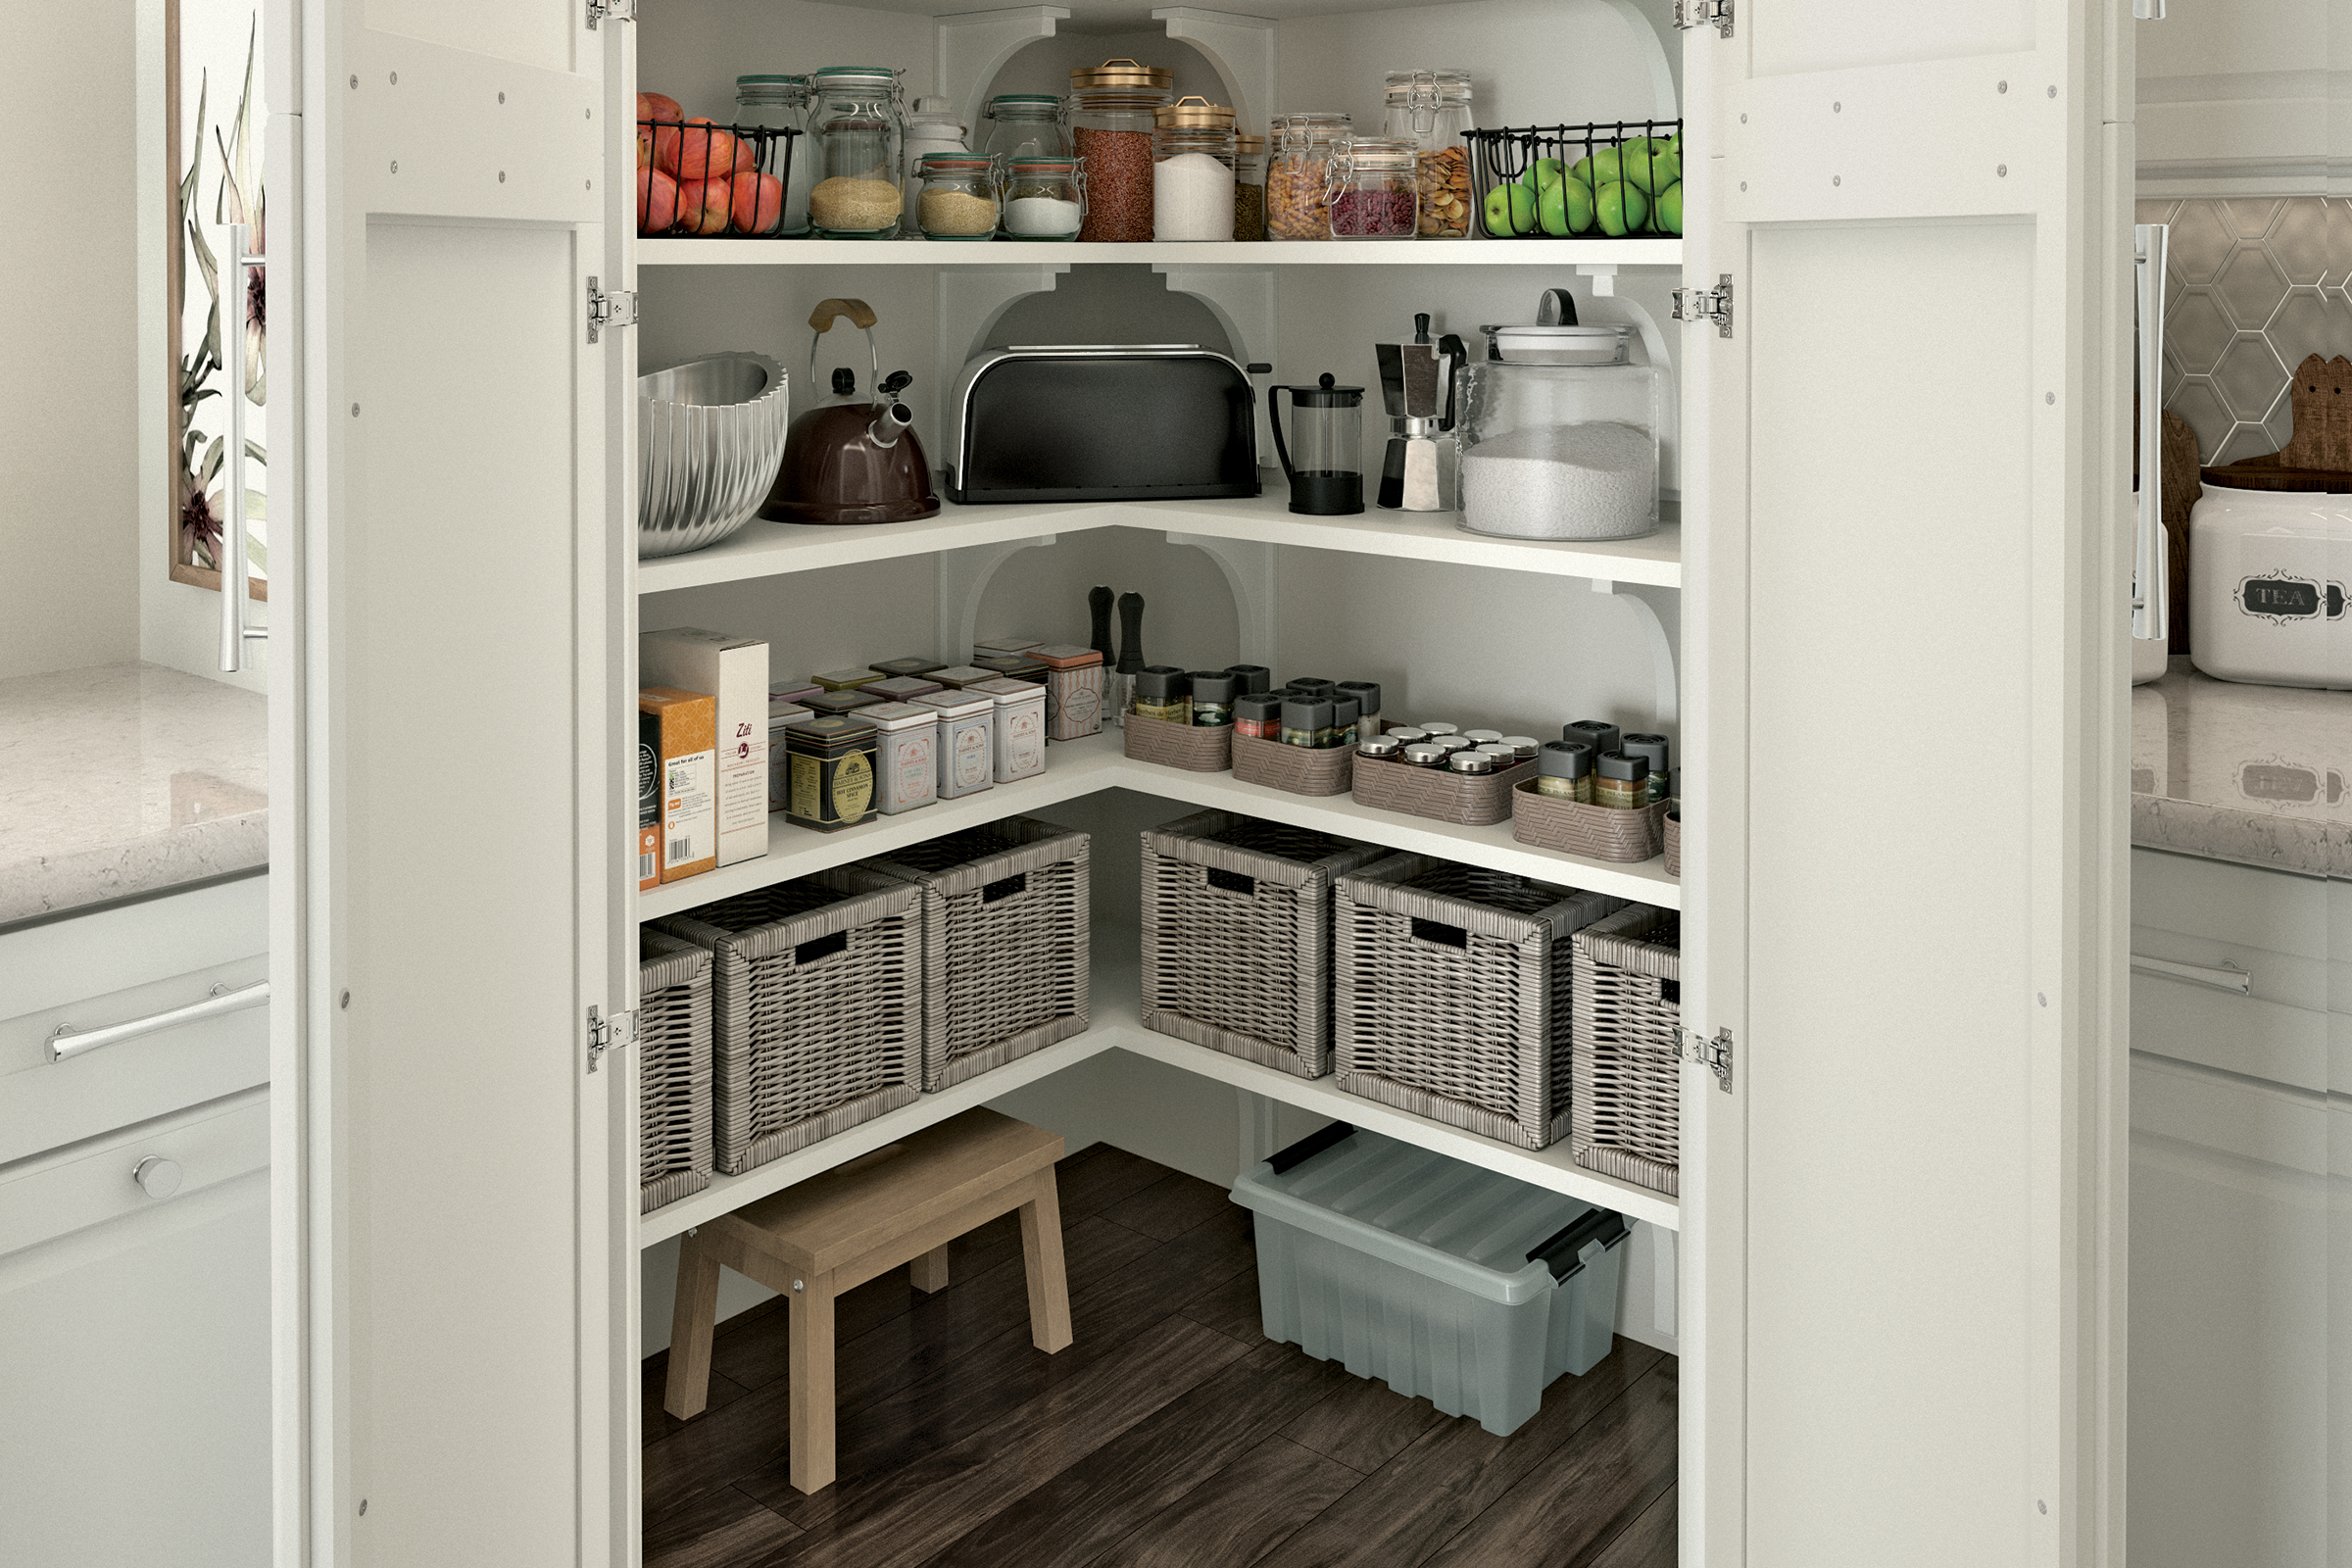 KraftMaid Dove White cabinet doors opened to reveal walk-in pantry storage in the corner of a kitchen